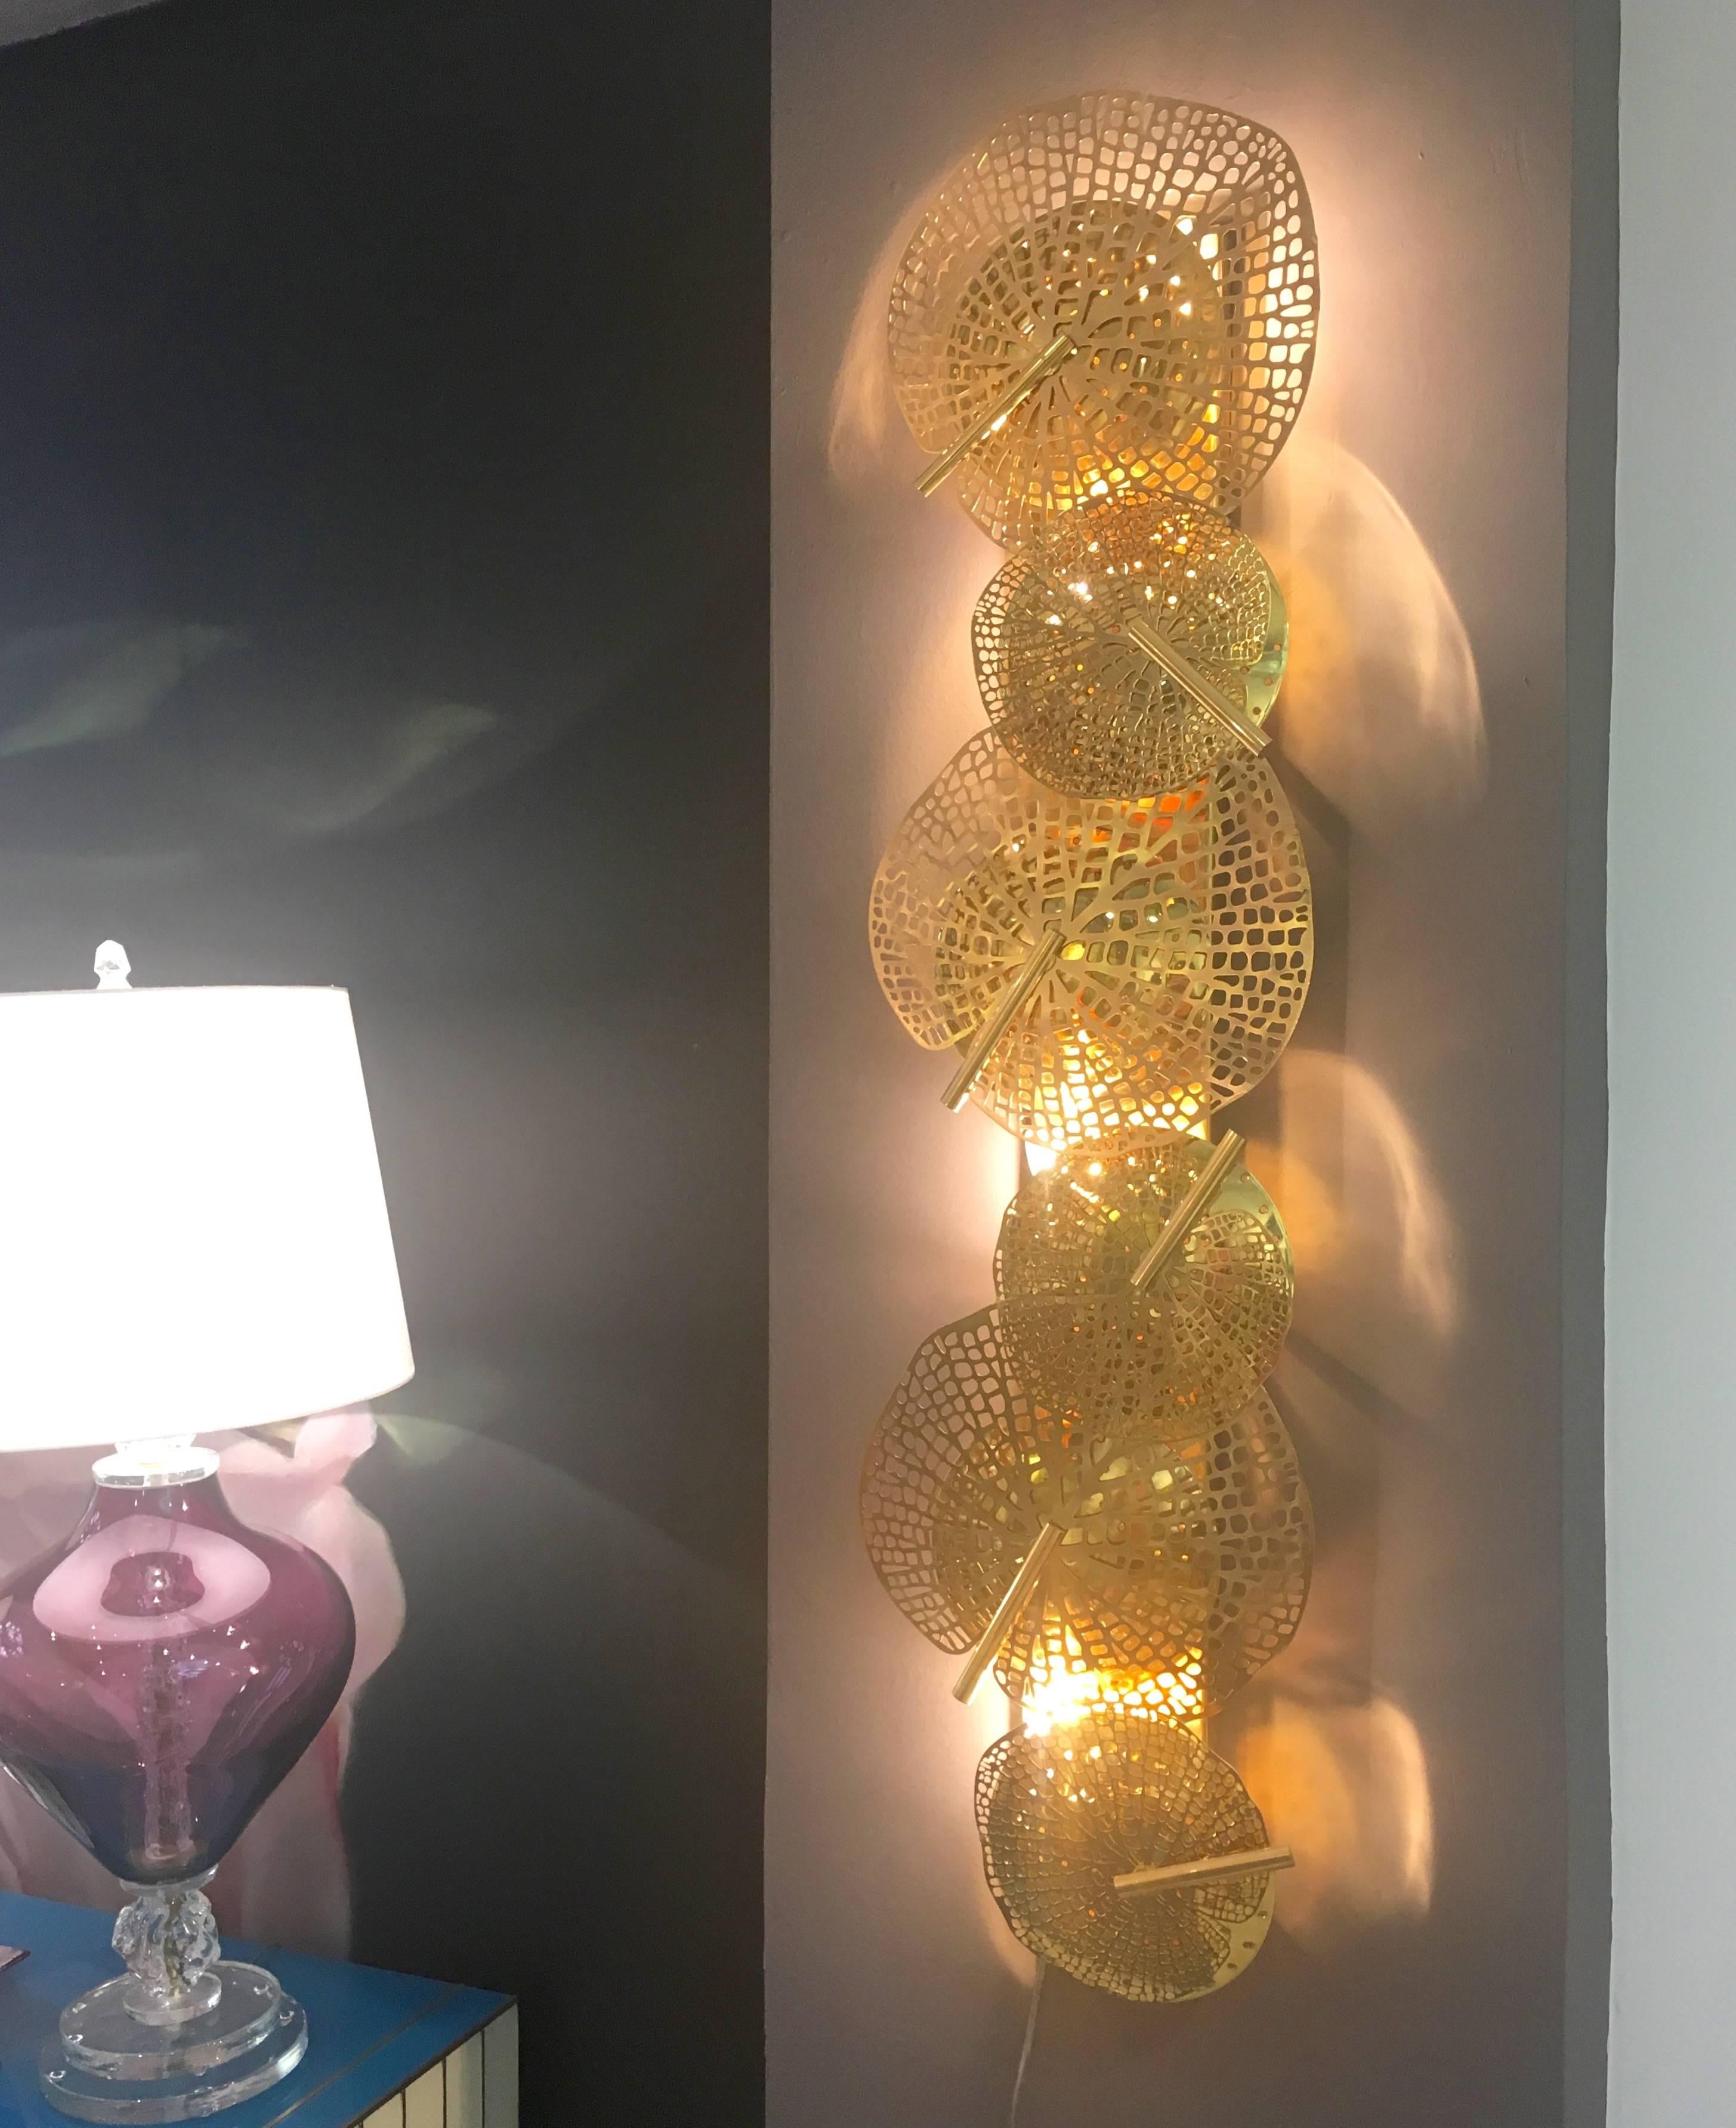 Contemporary Italian fine design pair of organic brass sculpture wall lights, entirely handmade, nature inspired Work of Art, decorated with perforated brass leaves of different sizes concealing pierced concave discs that hide a brass cone-shaped